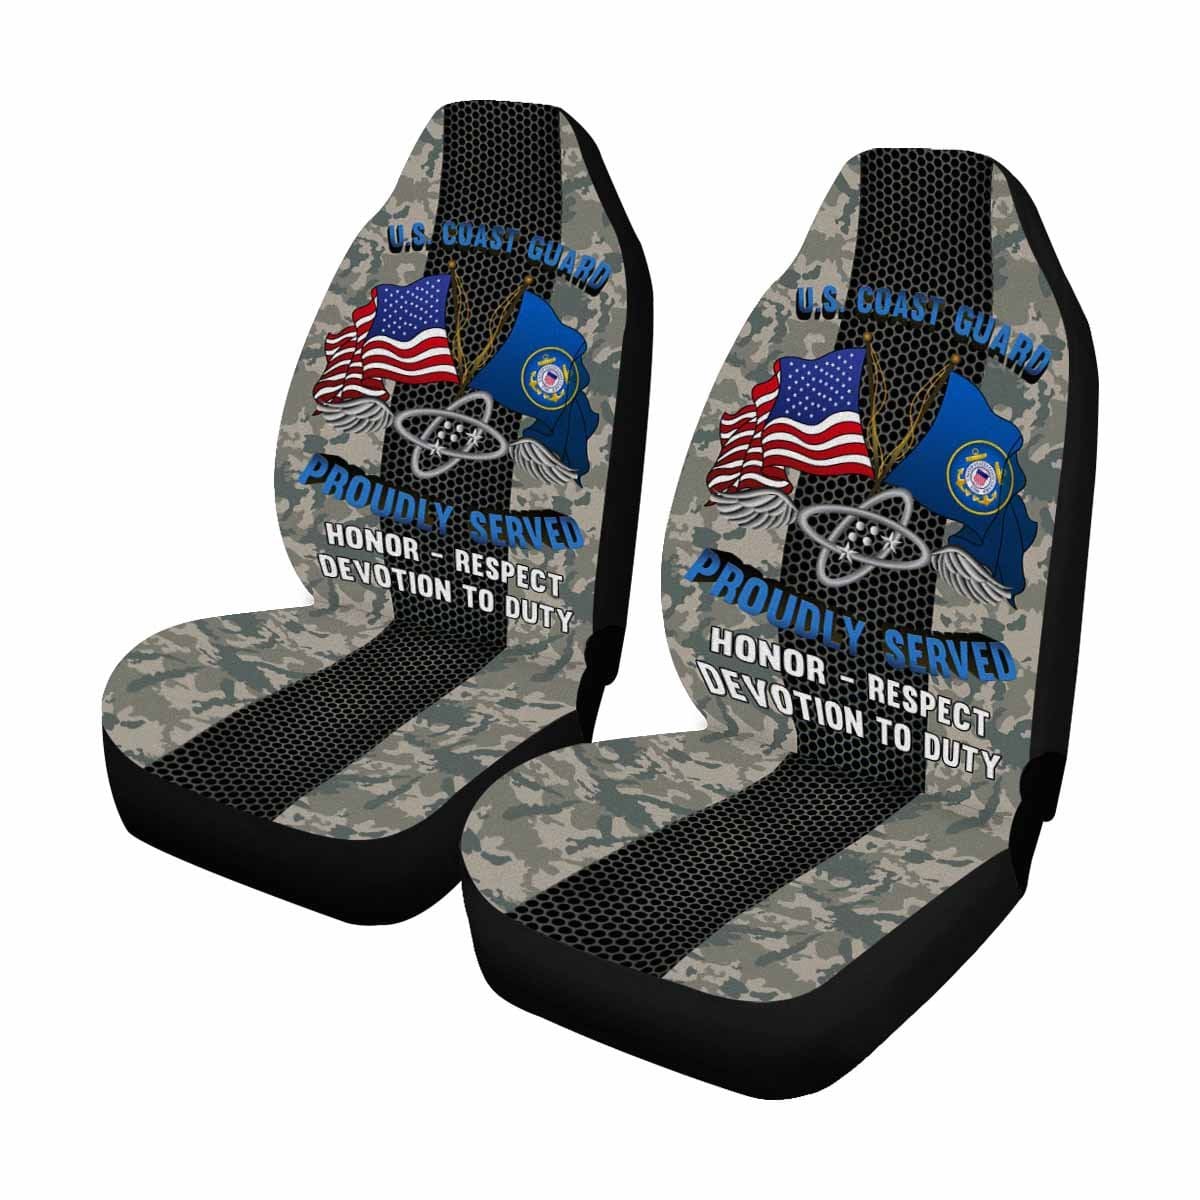 USCG AVIONICS ELECTRICAL TECHNICIAN AET Logo Proudly Served - Car Seat Covers (Set of 2)-SeatCovers-USCG-Rate-Veterans Nation